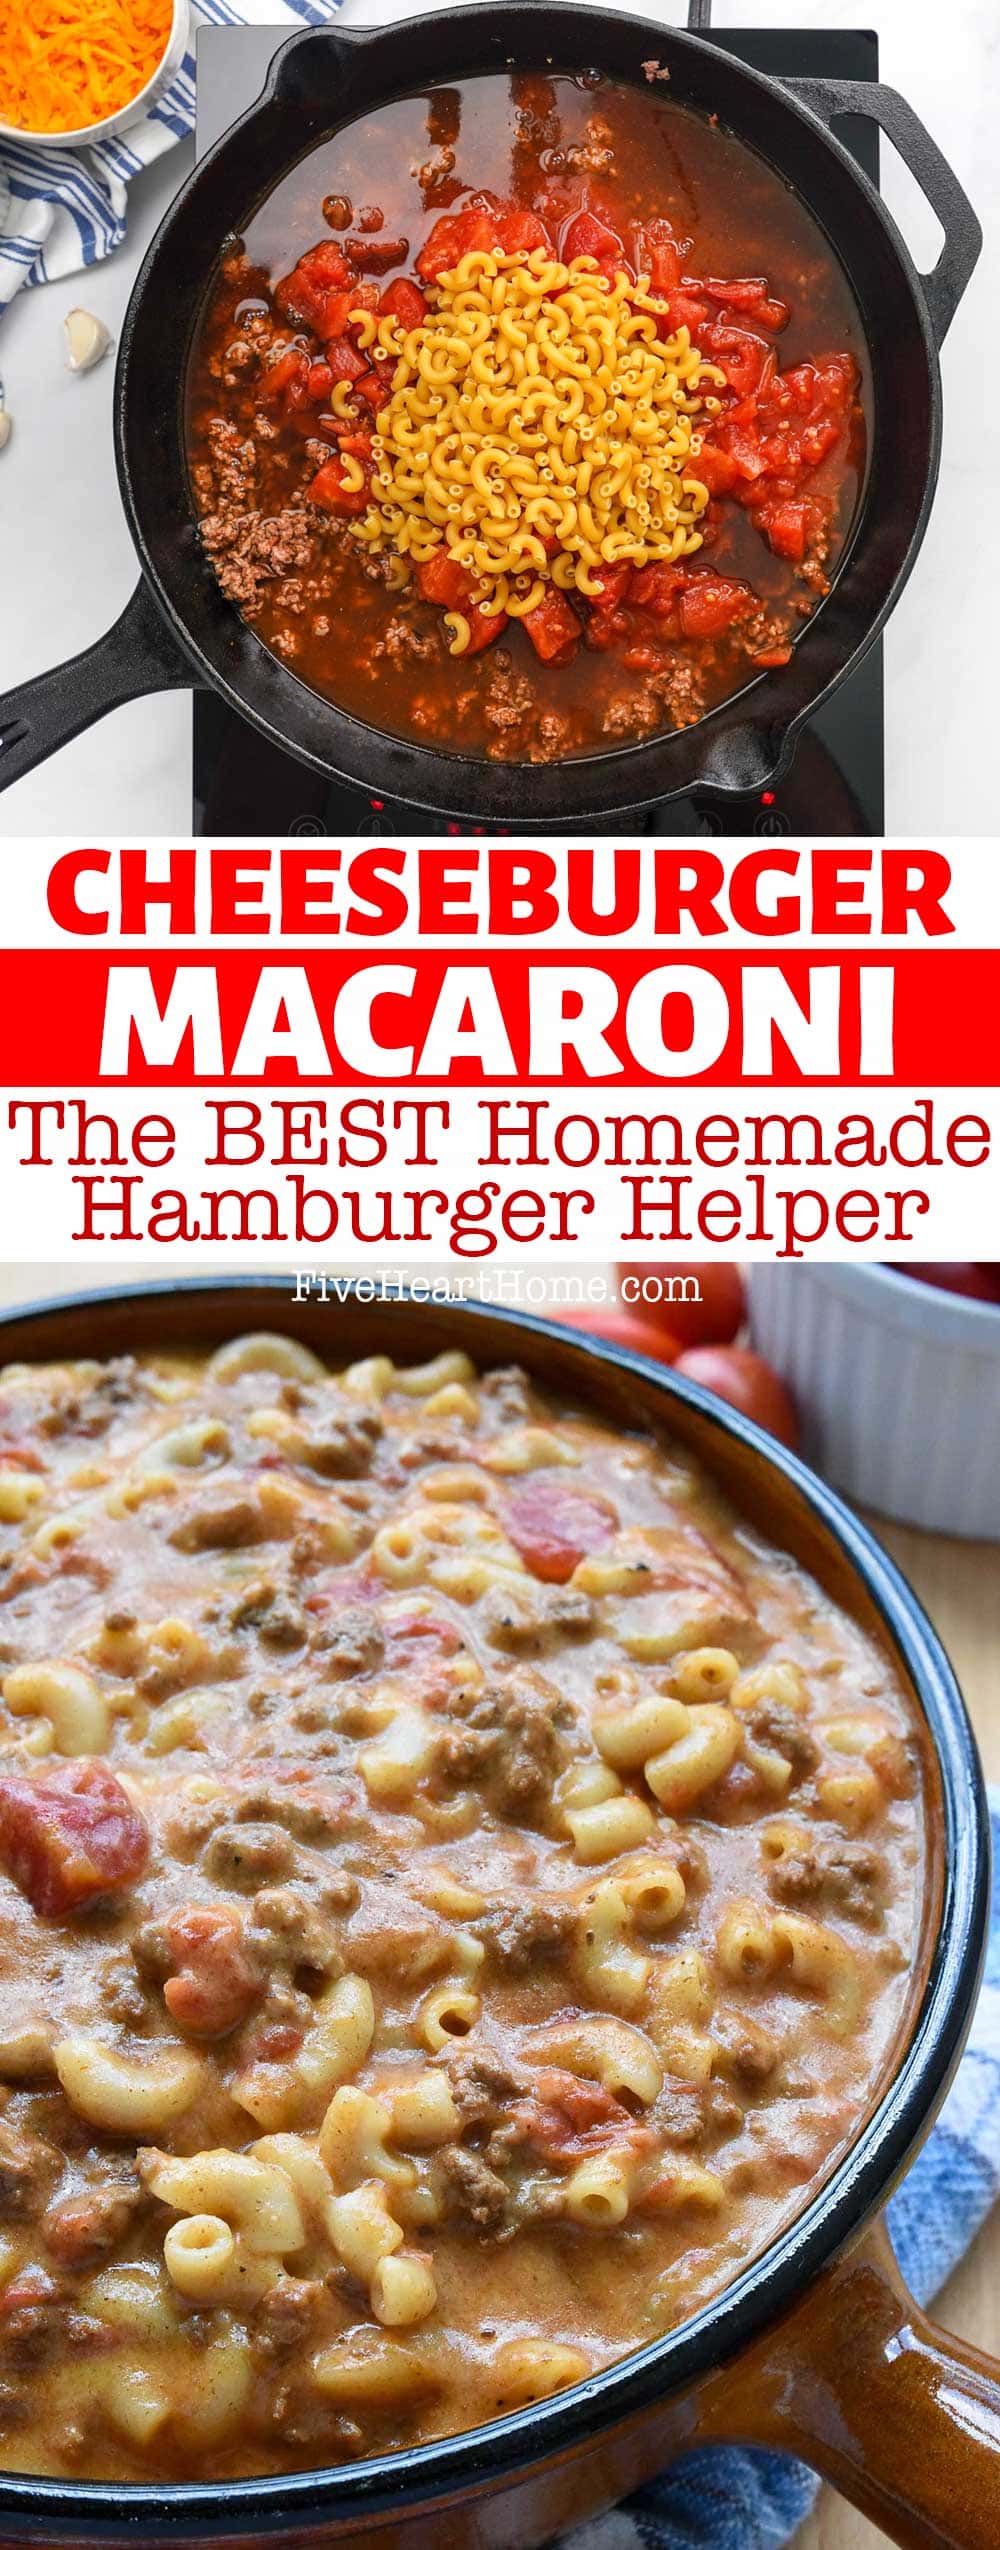 Cheeseburger Macaroni ~ a creamy, flavorful, copycat homemade Hamburger Helper recipe that's comforting, all-natural, and easy to make from scratch! | FiveHeartHome.com via @fivehearthome